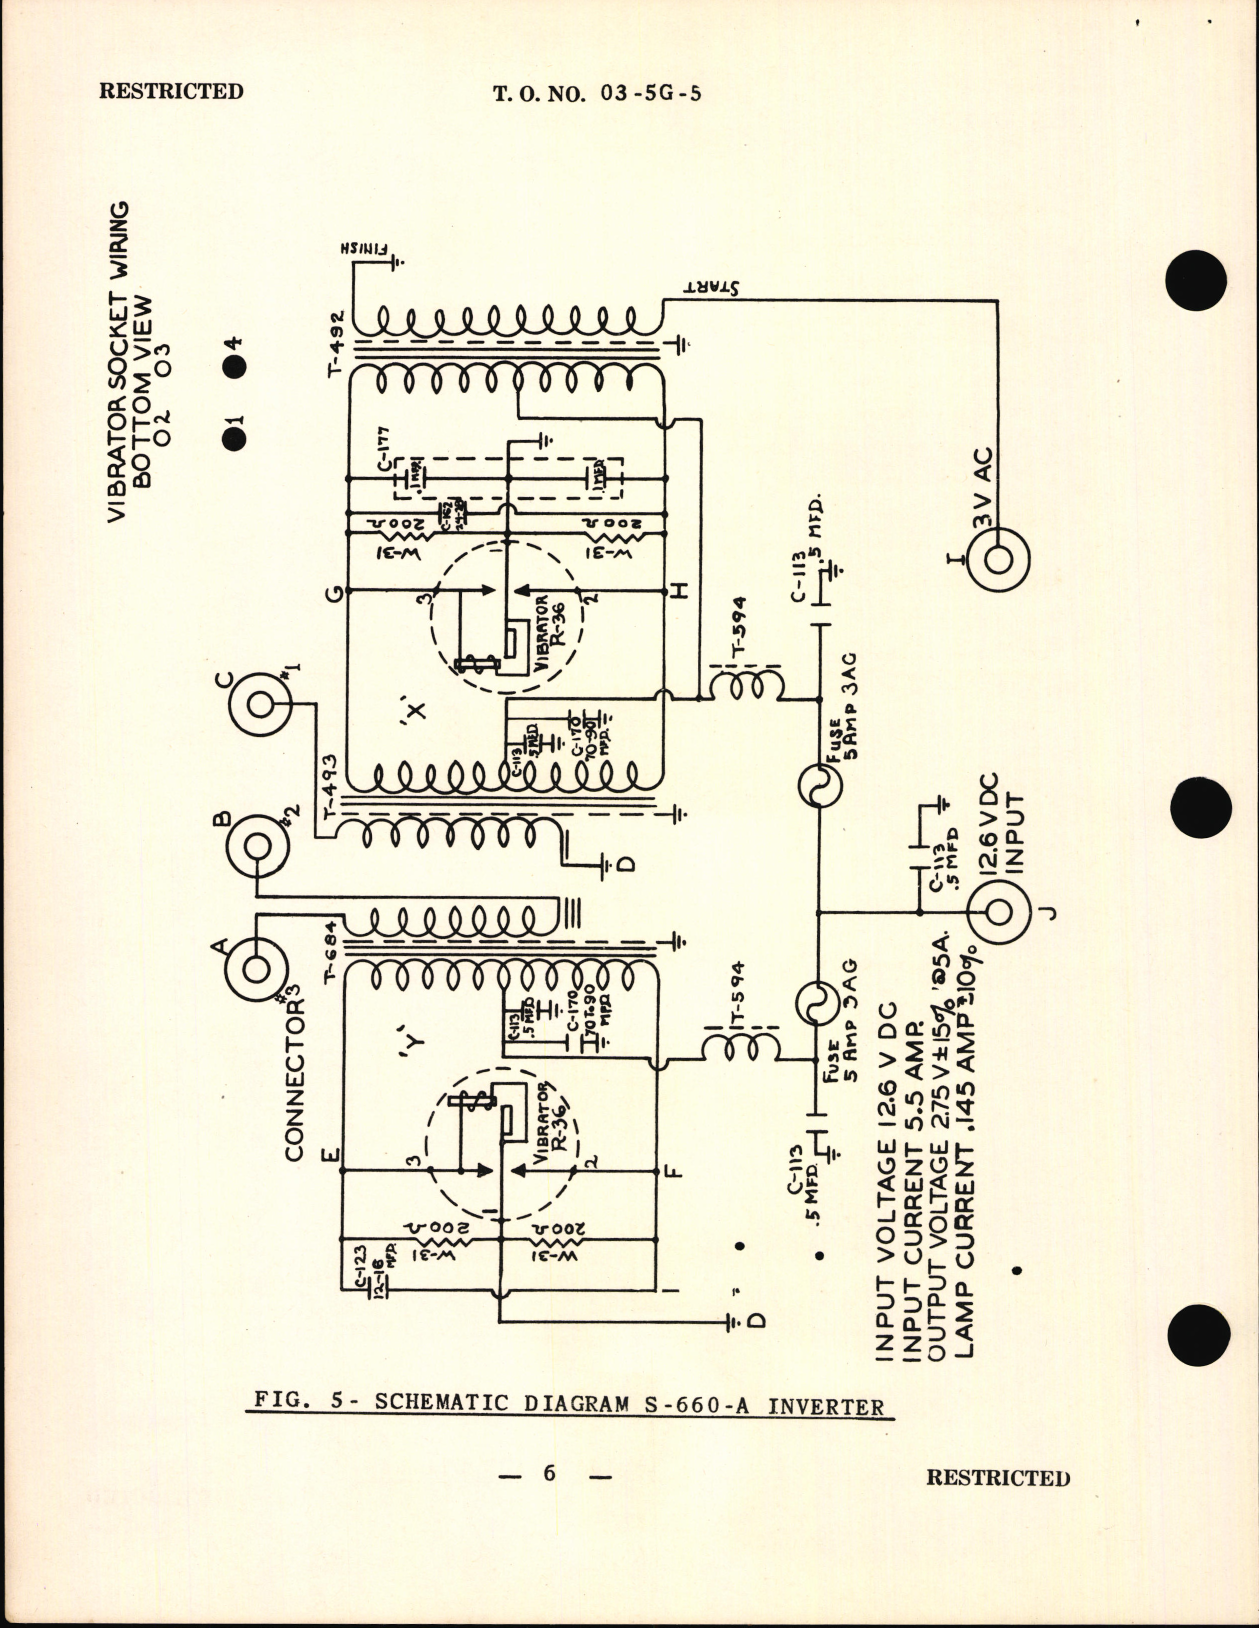 Sample page 8 from AirCorps Library document: Handbook of Instructions with Assembly Parts List for Inverters Vibrator Type S-660A, S-777, and S-799A